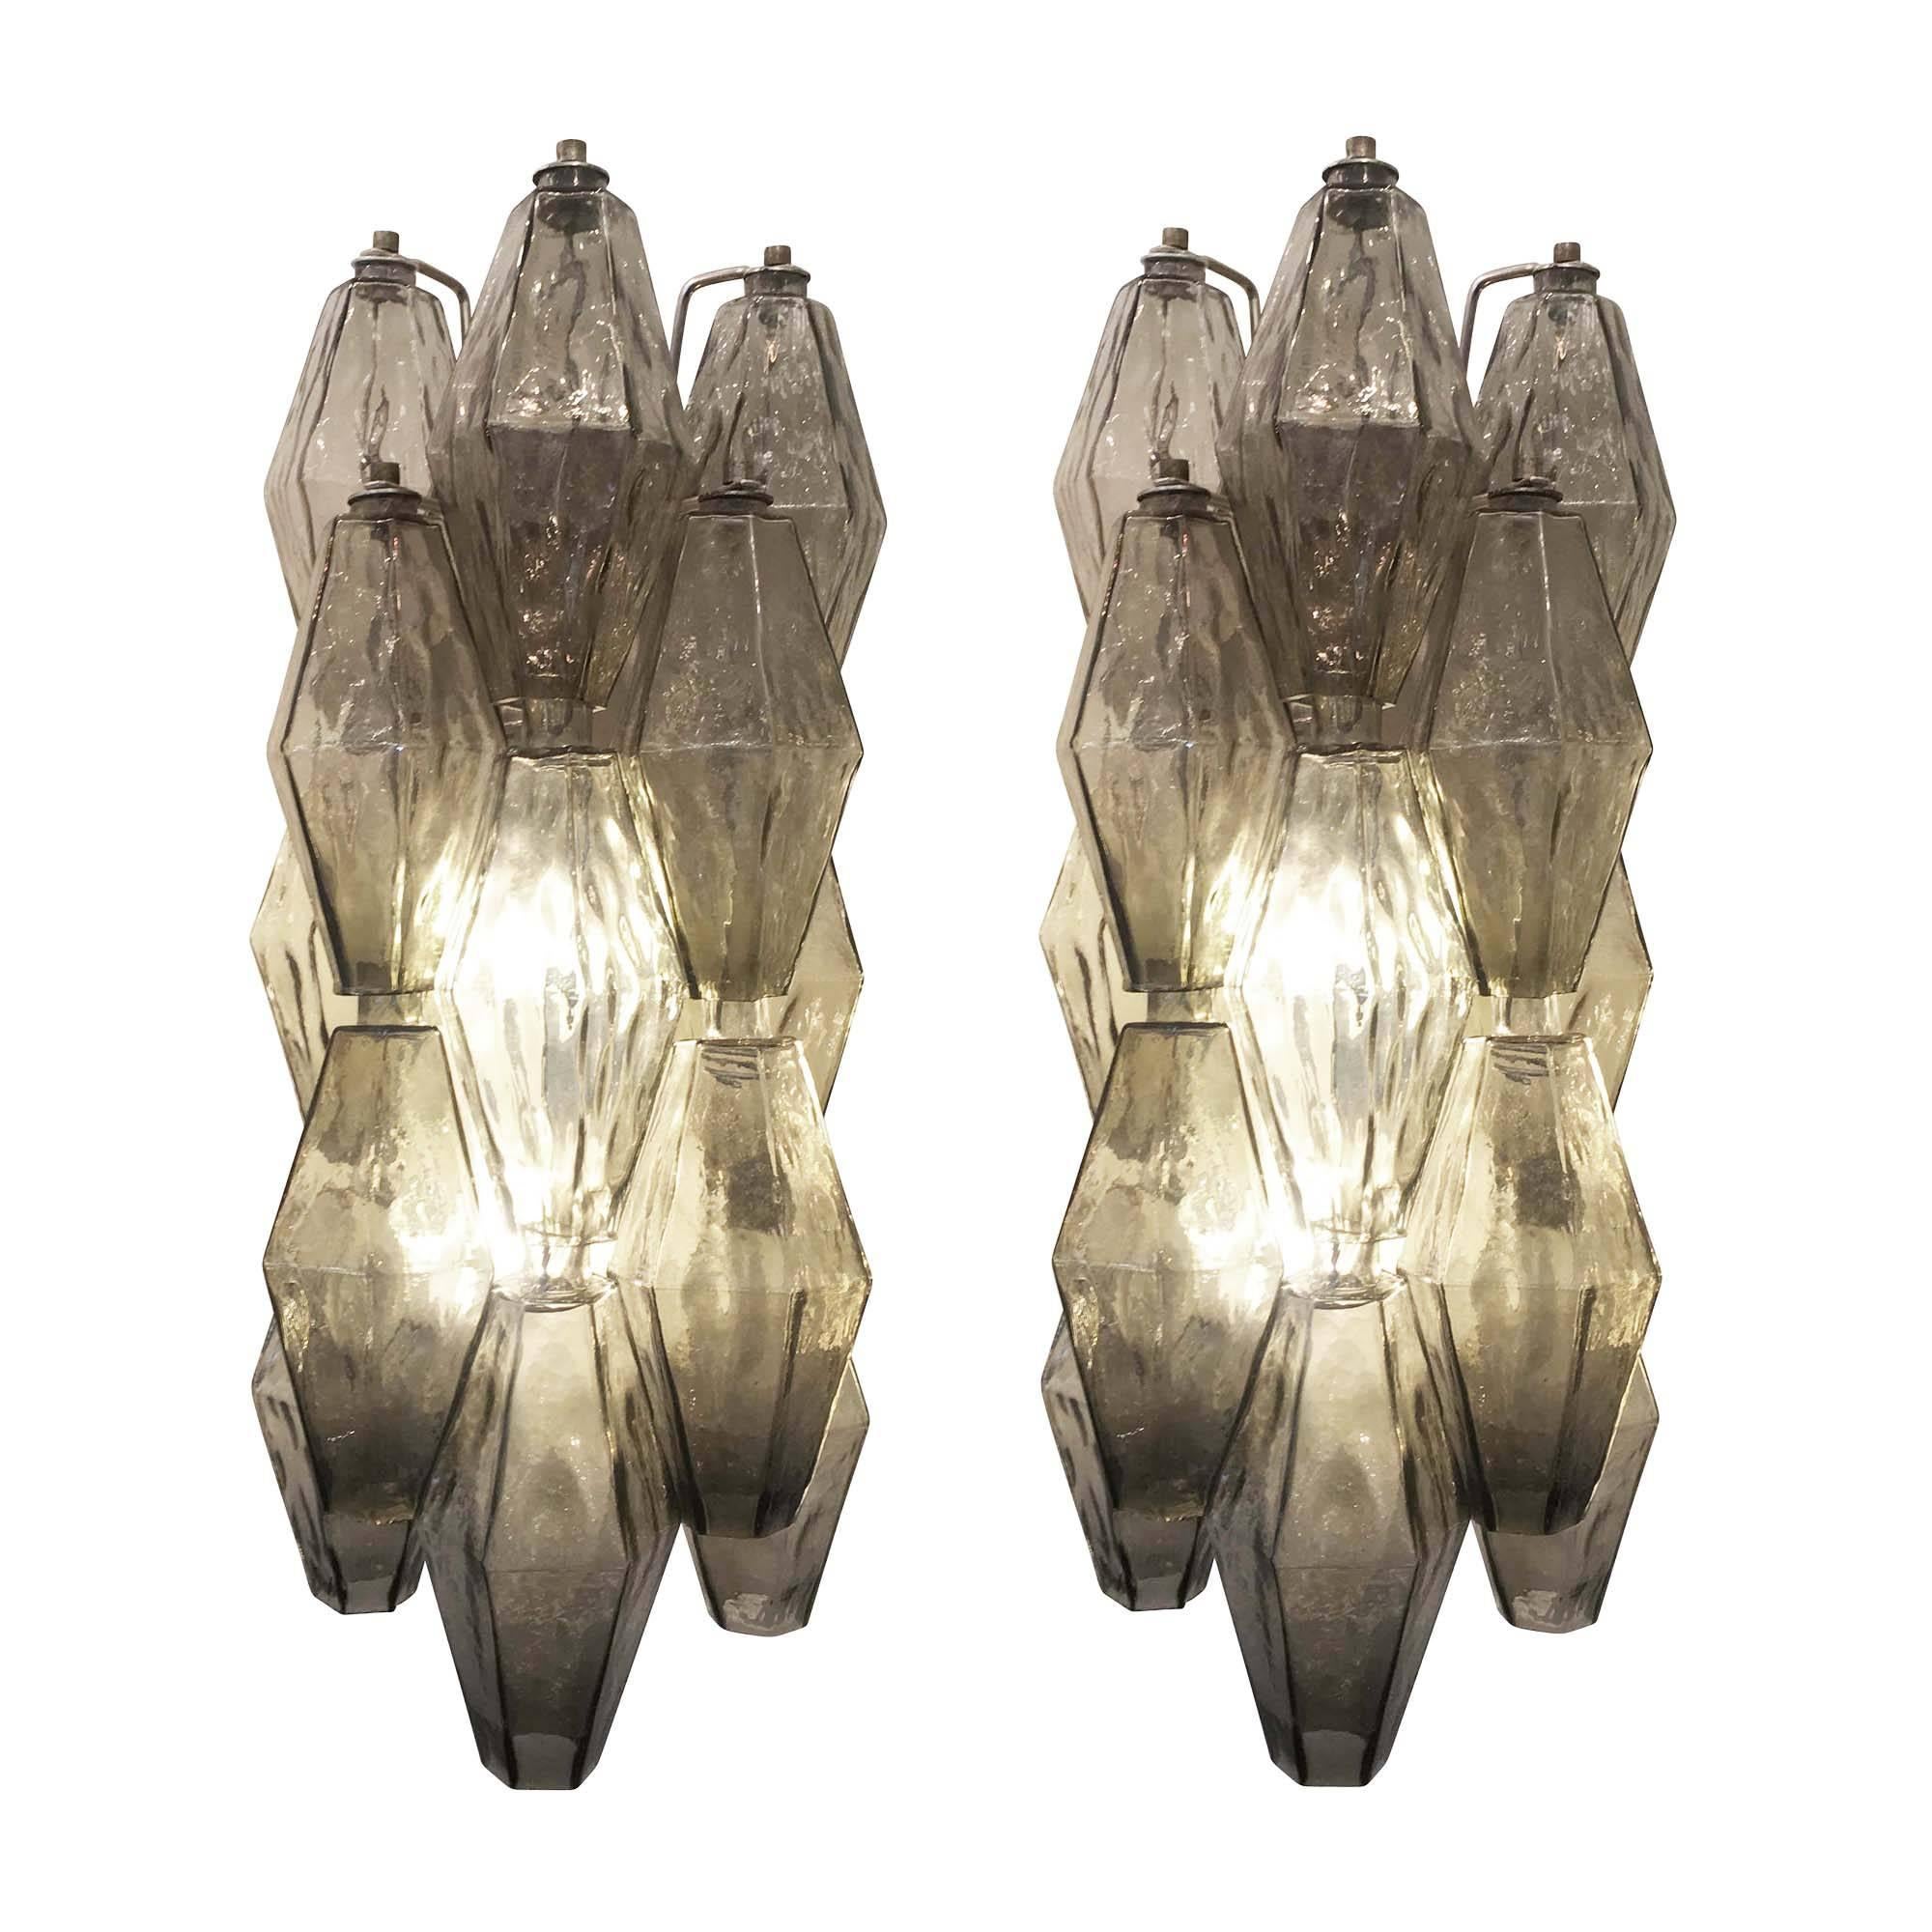 Large Venini sconces with grey iridescent polyhedral glasses. The frame of each is nickel and holds two candelabra sockets.